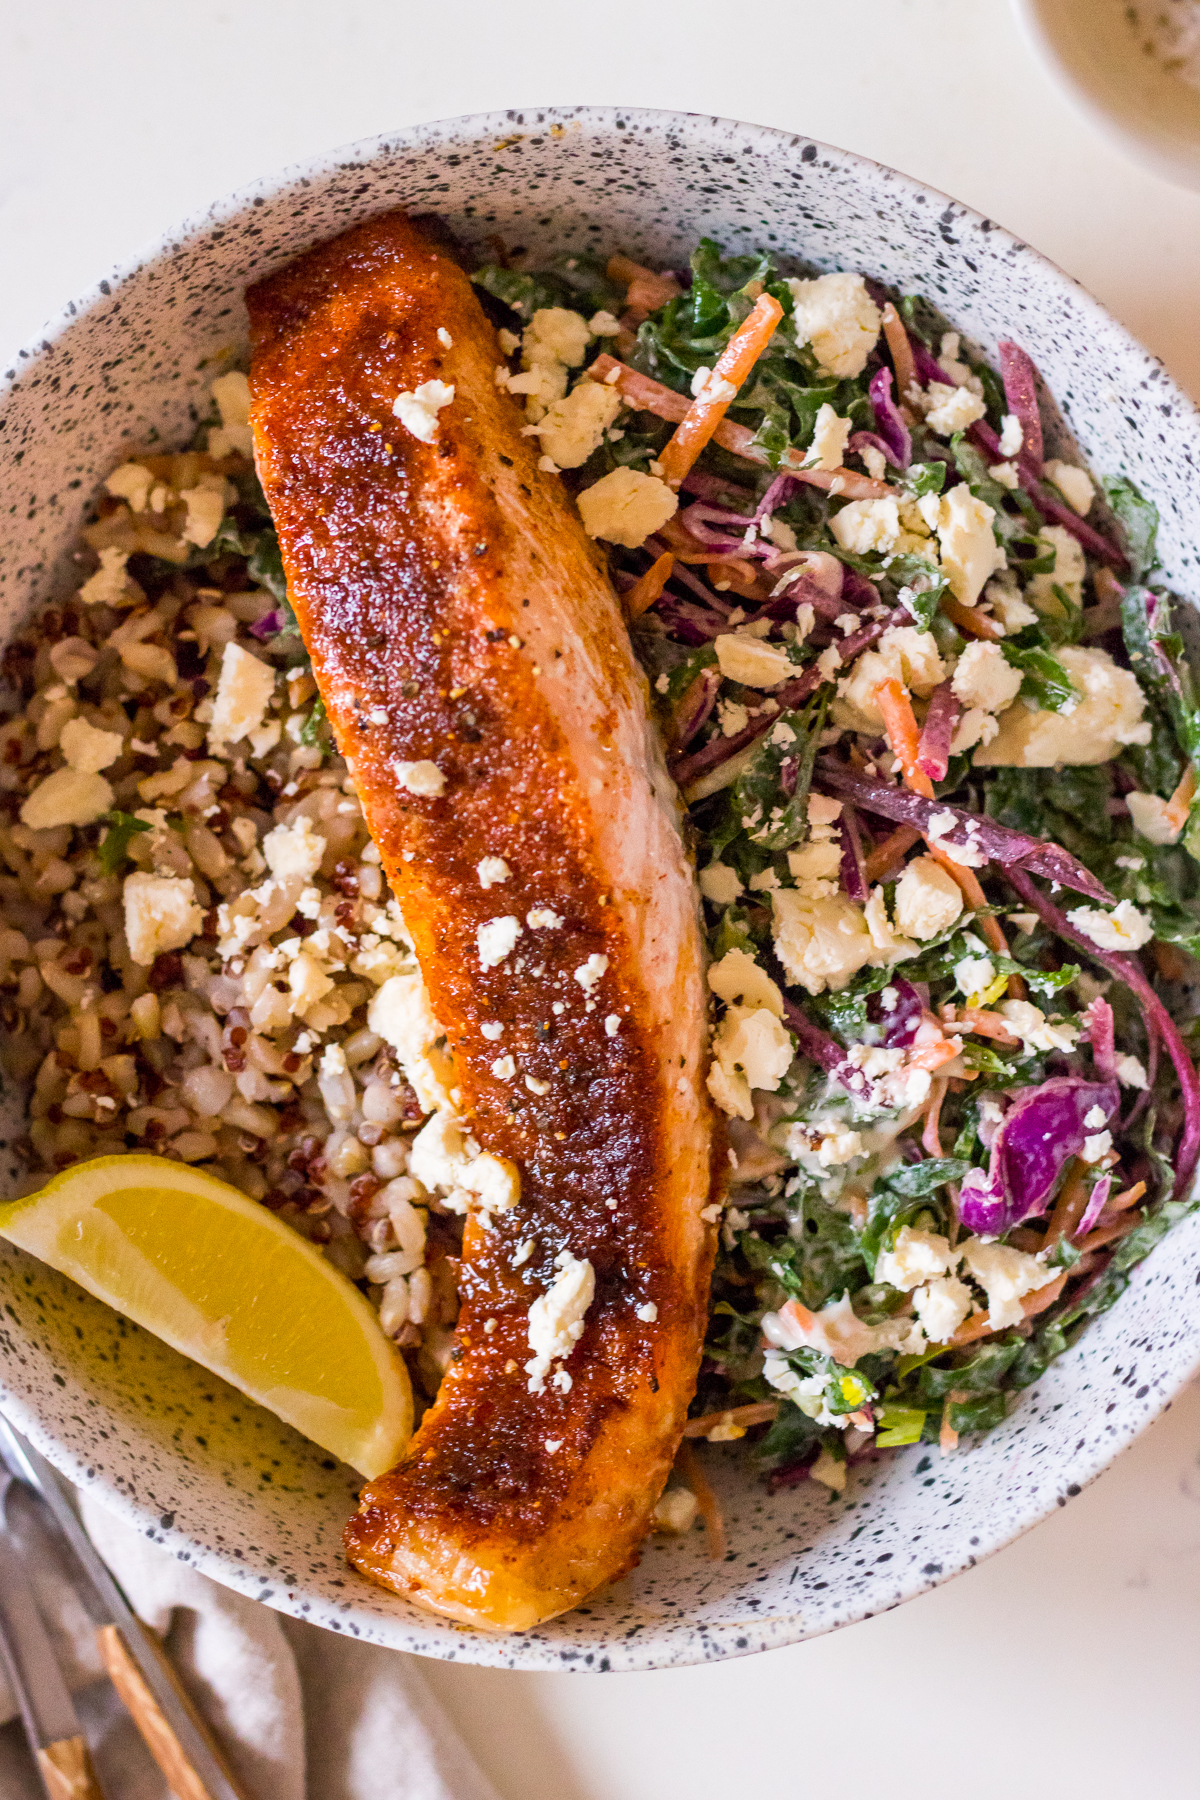 Speckled ceramic bowl filled with brown rice, coleslaw, salmon fillet baked with brown sugar